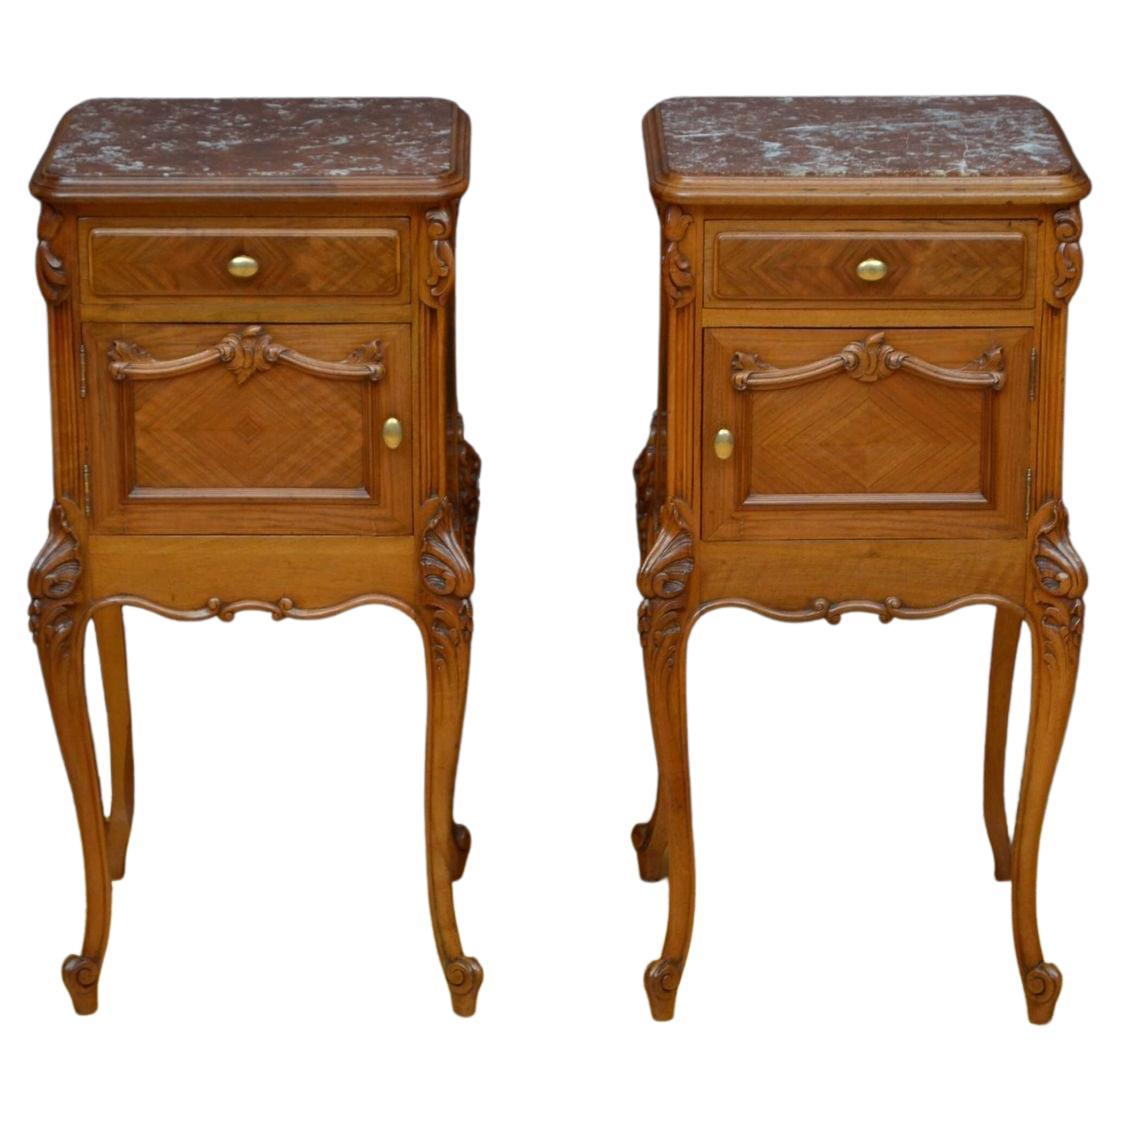 Pair of Bedside Cabinets in Walnut